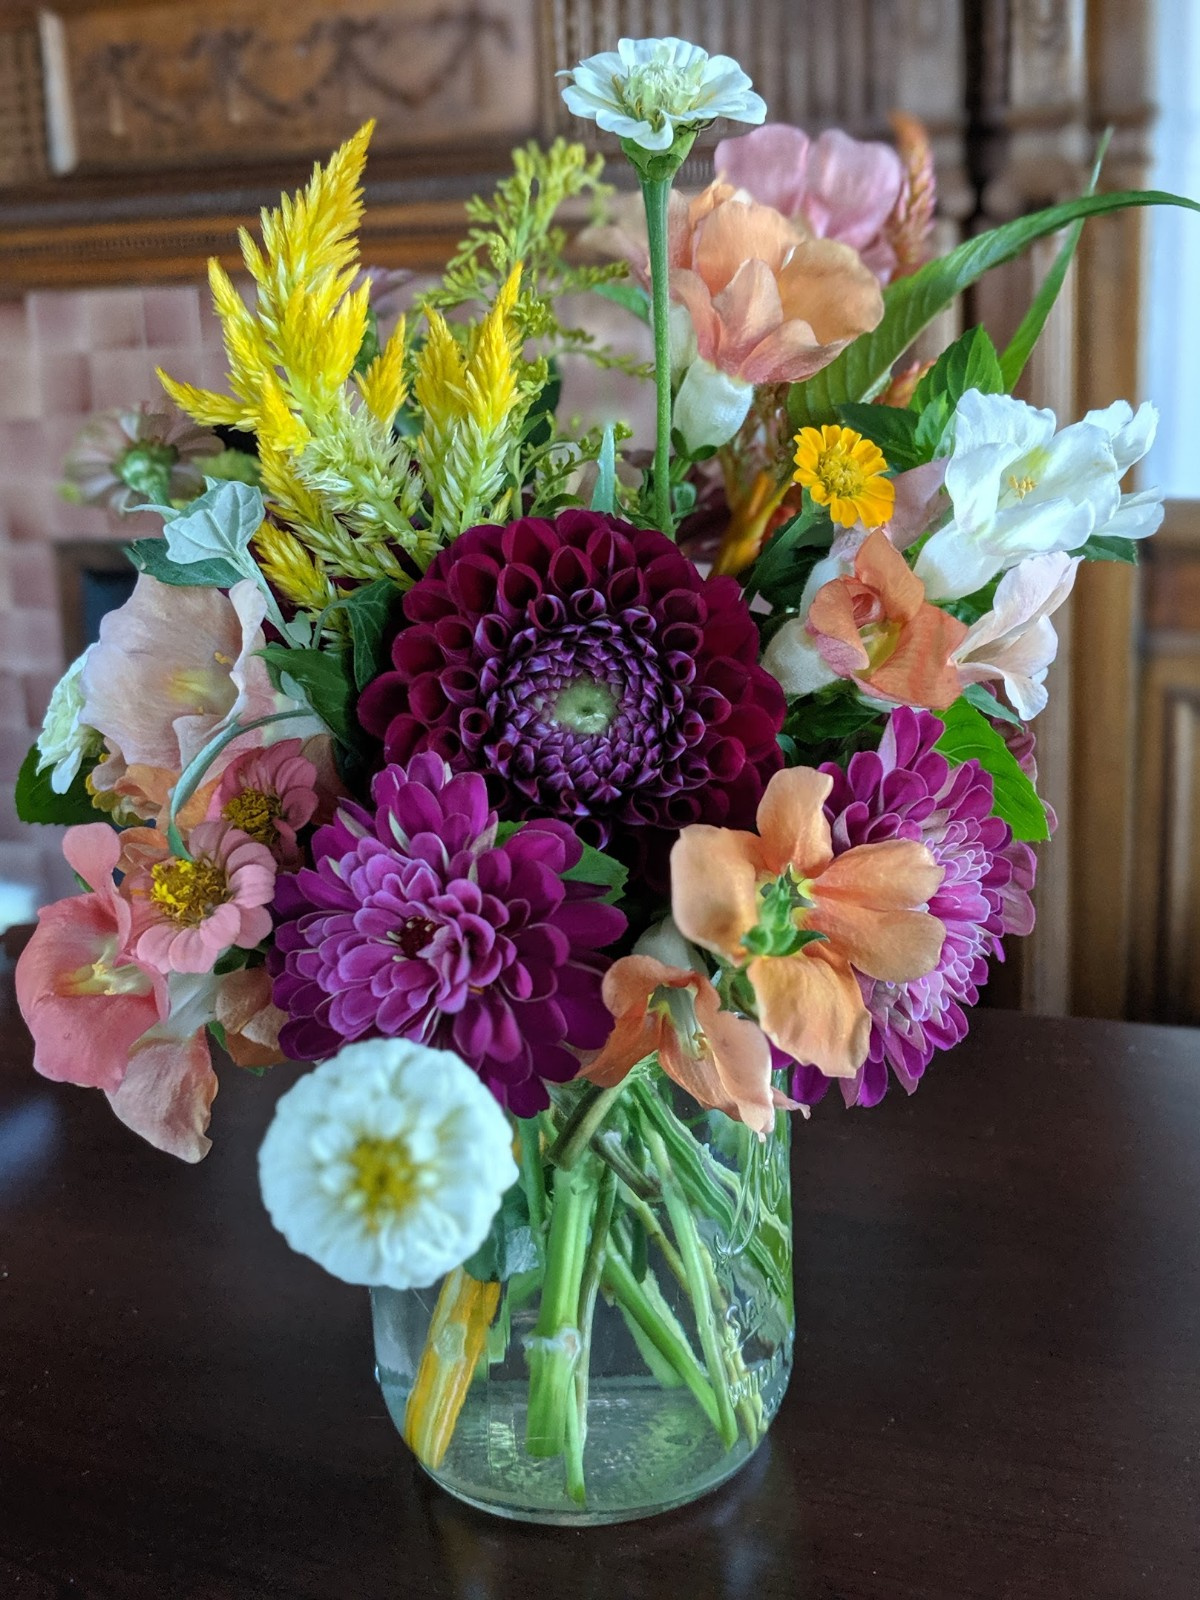 A vase of colorful flowers.